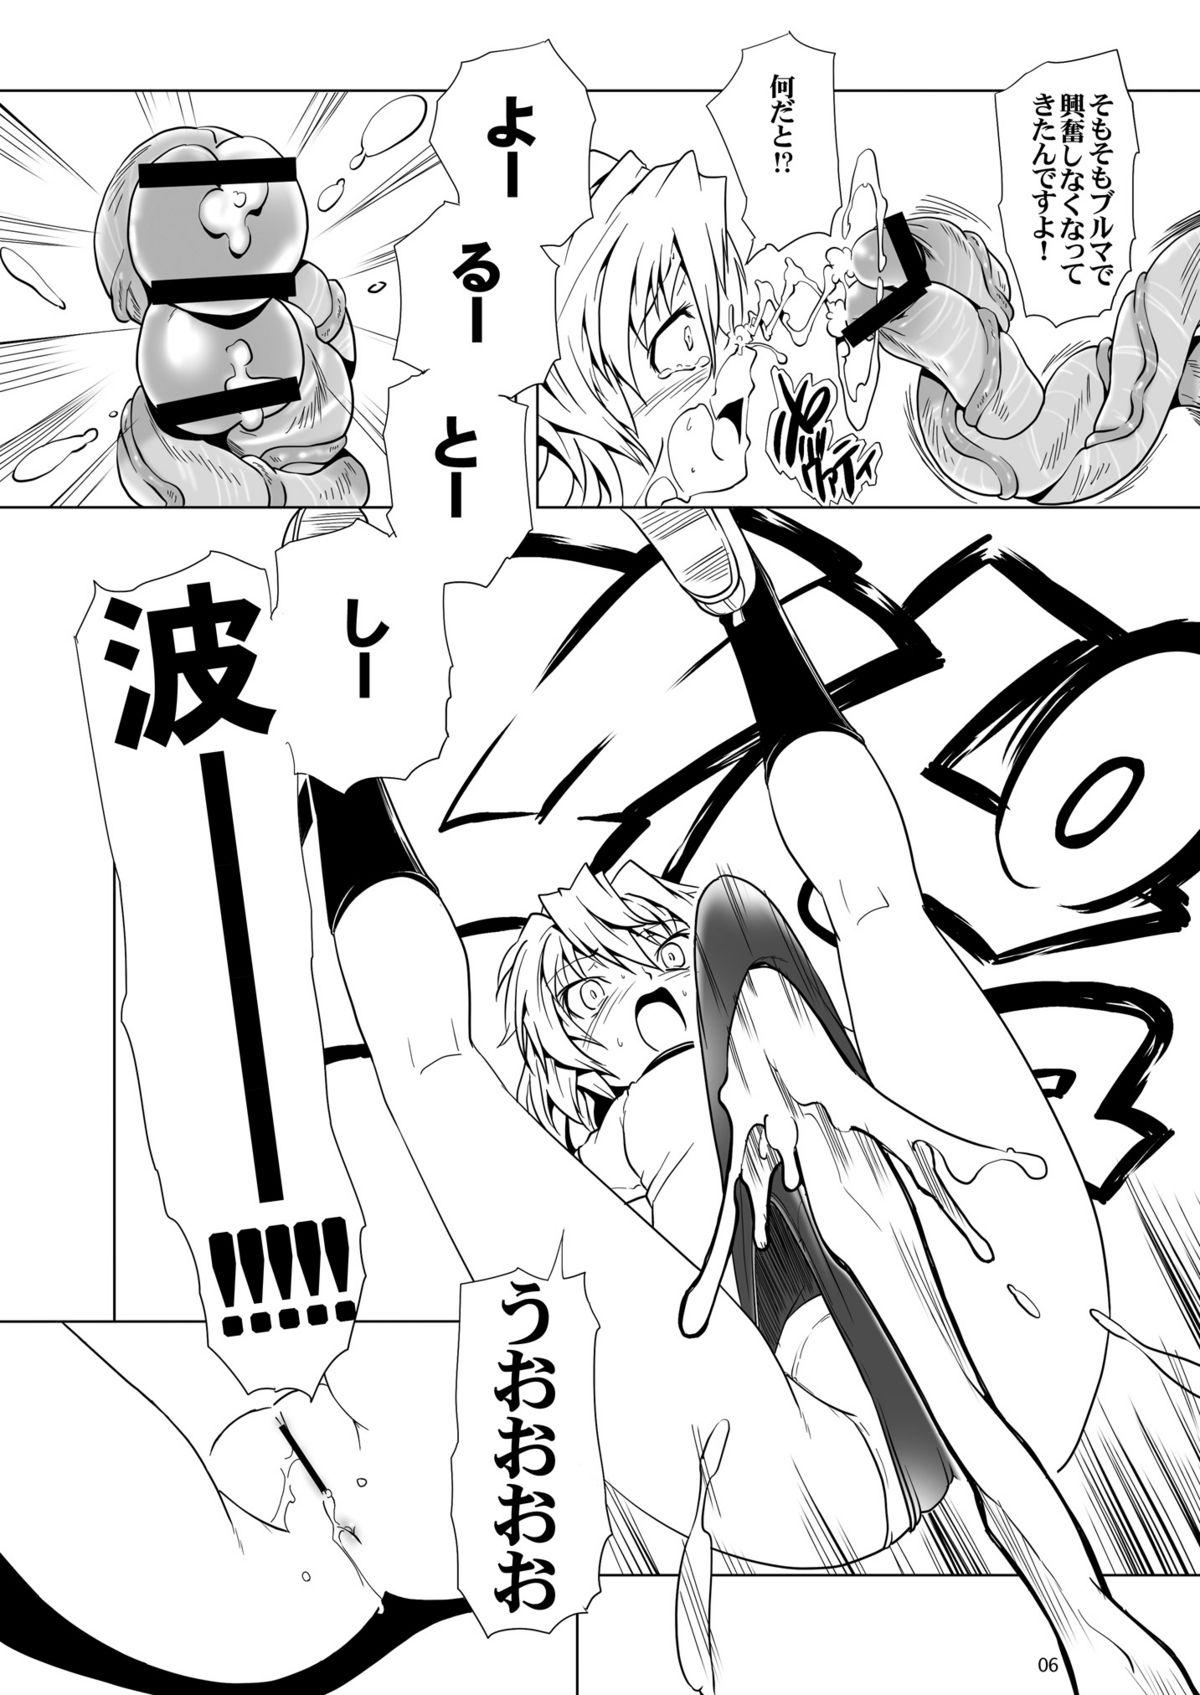 Free Blowjobs 魔理沙のブルマでとろろ芋をすりおろす - Touhou project Culos - Page 6